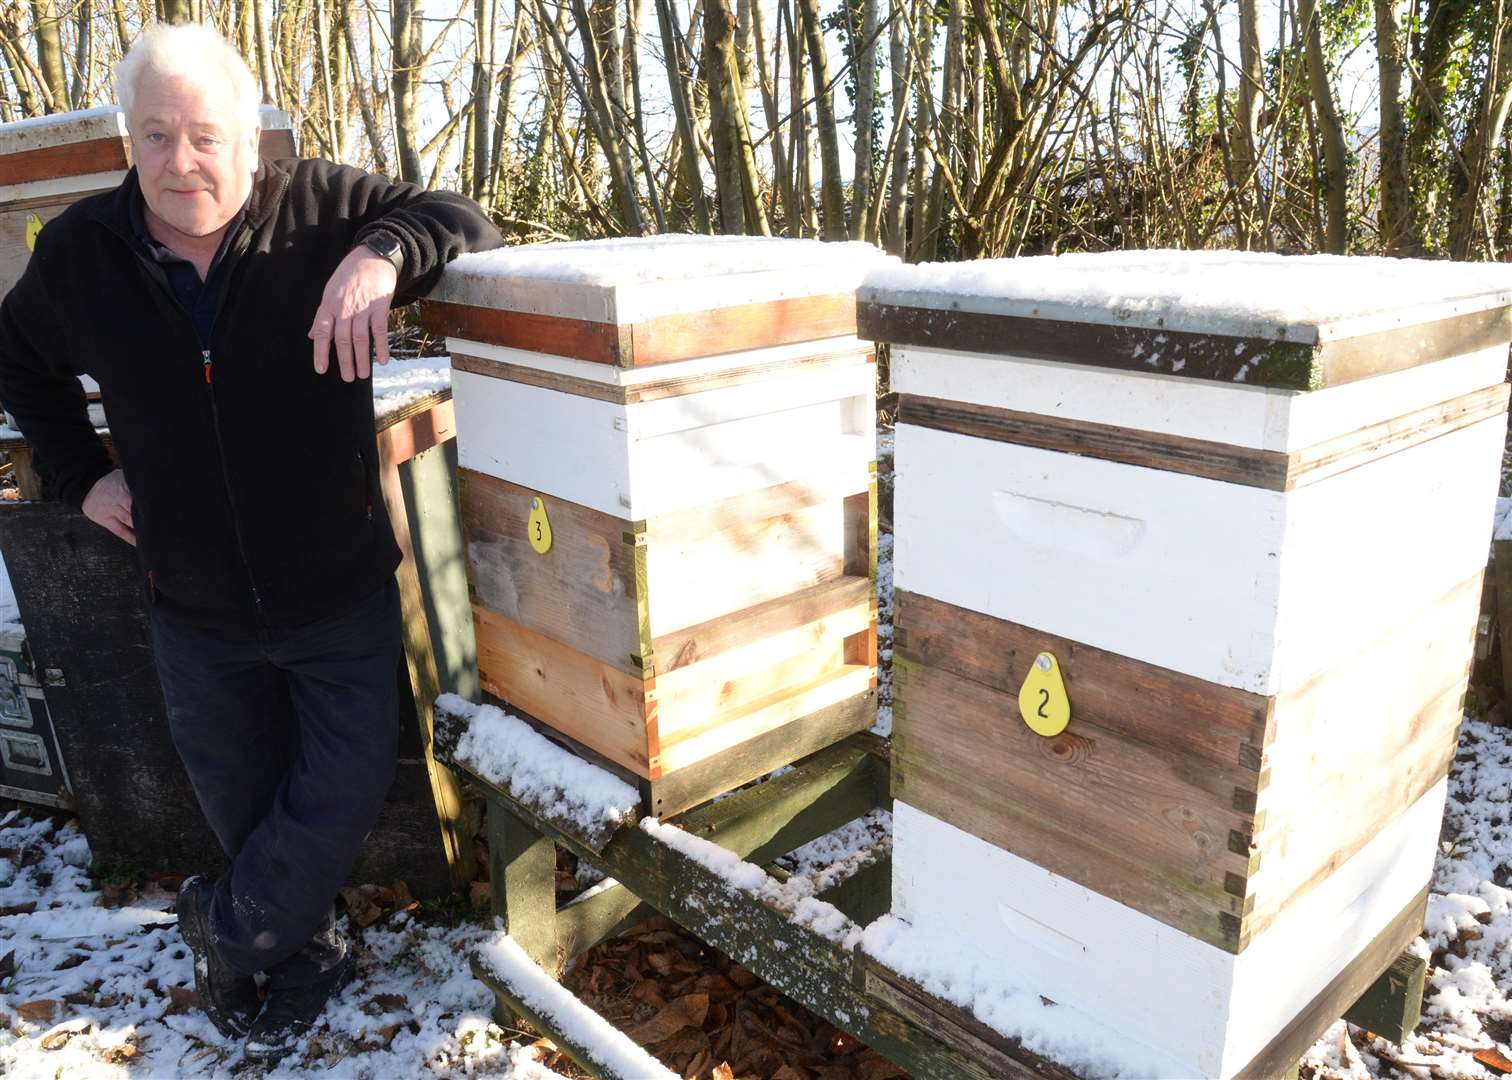 Michael Smith who has lost thousands of bees after vandals attacked the hives